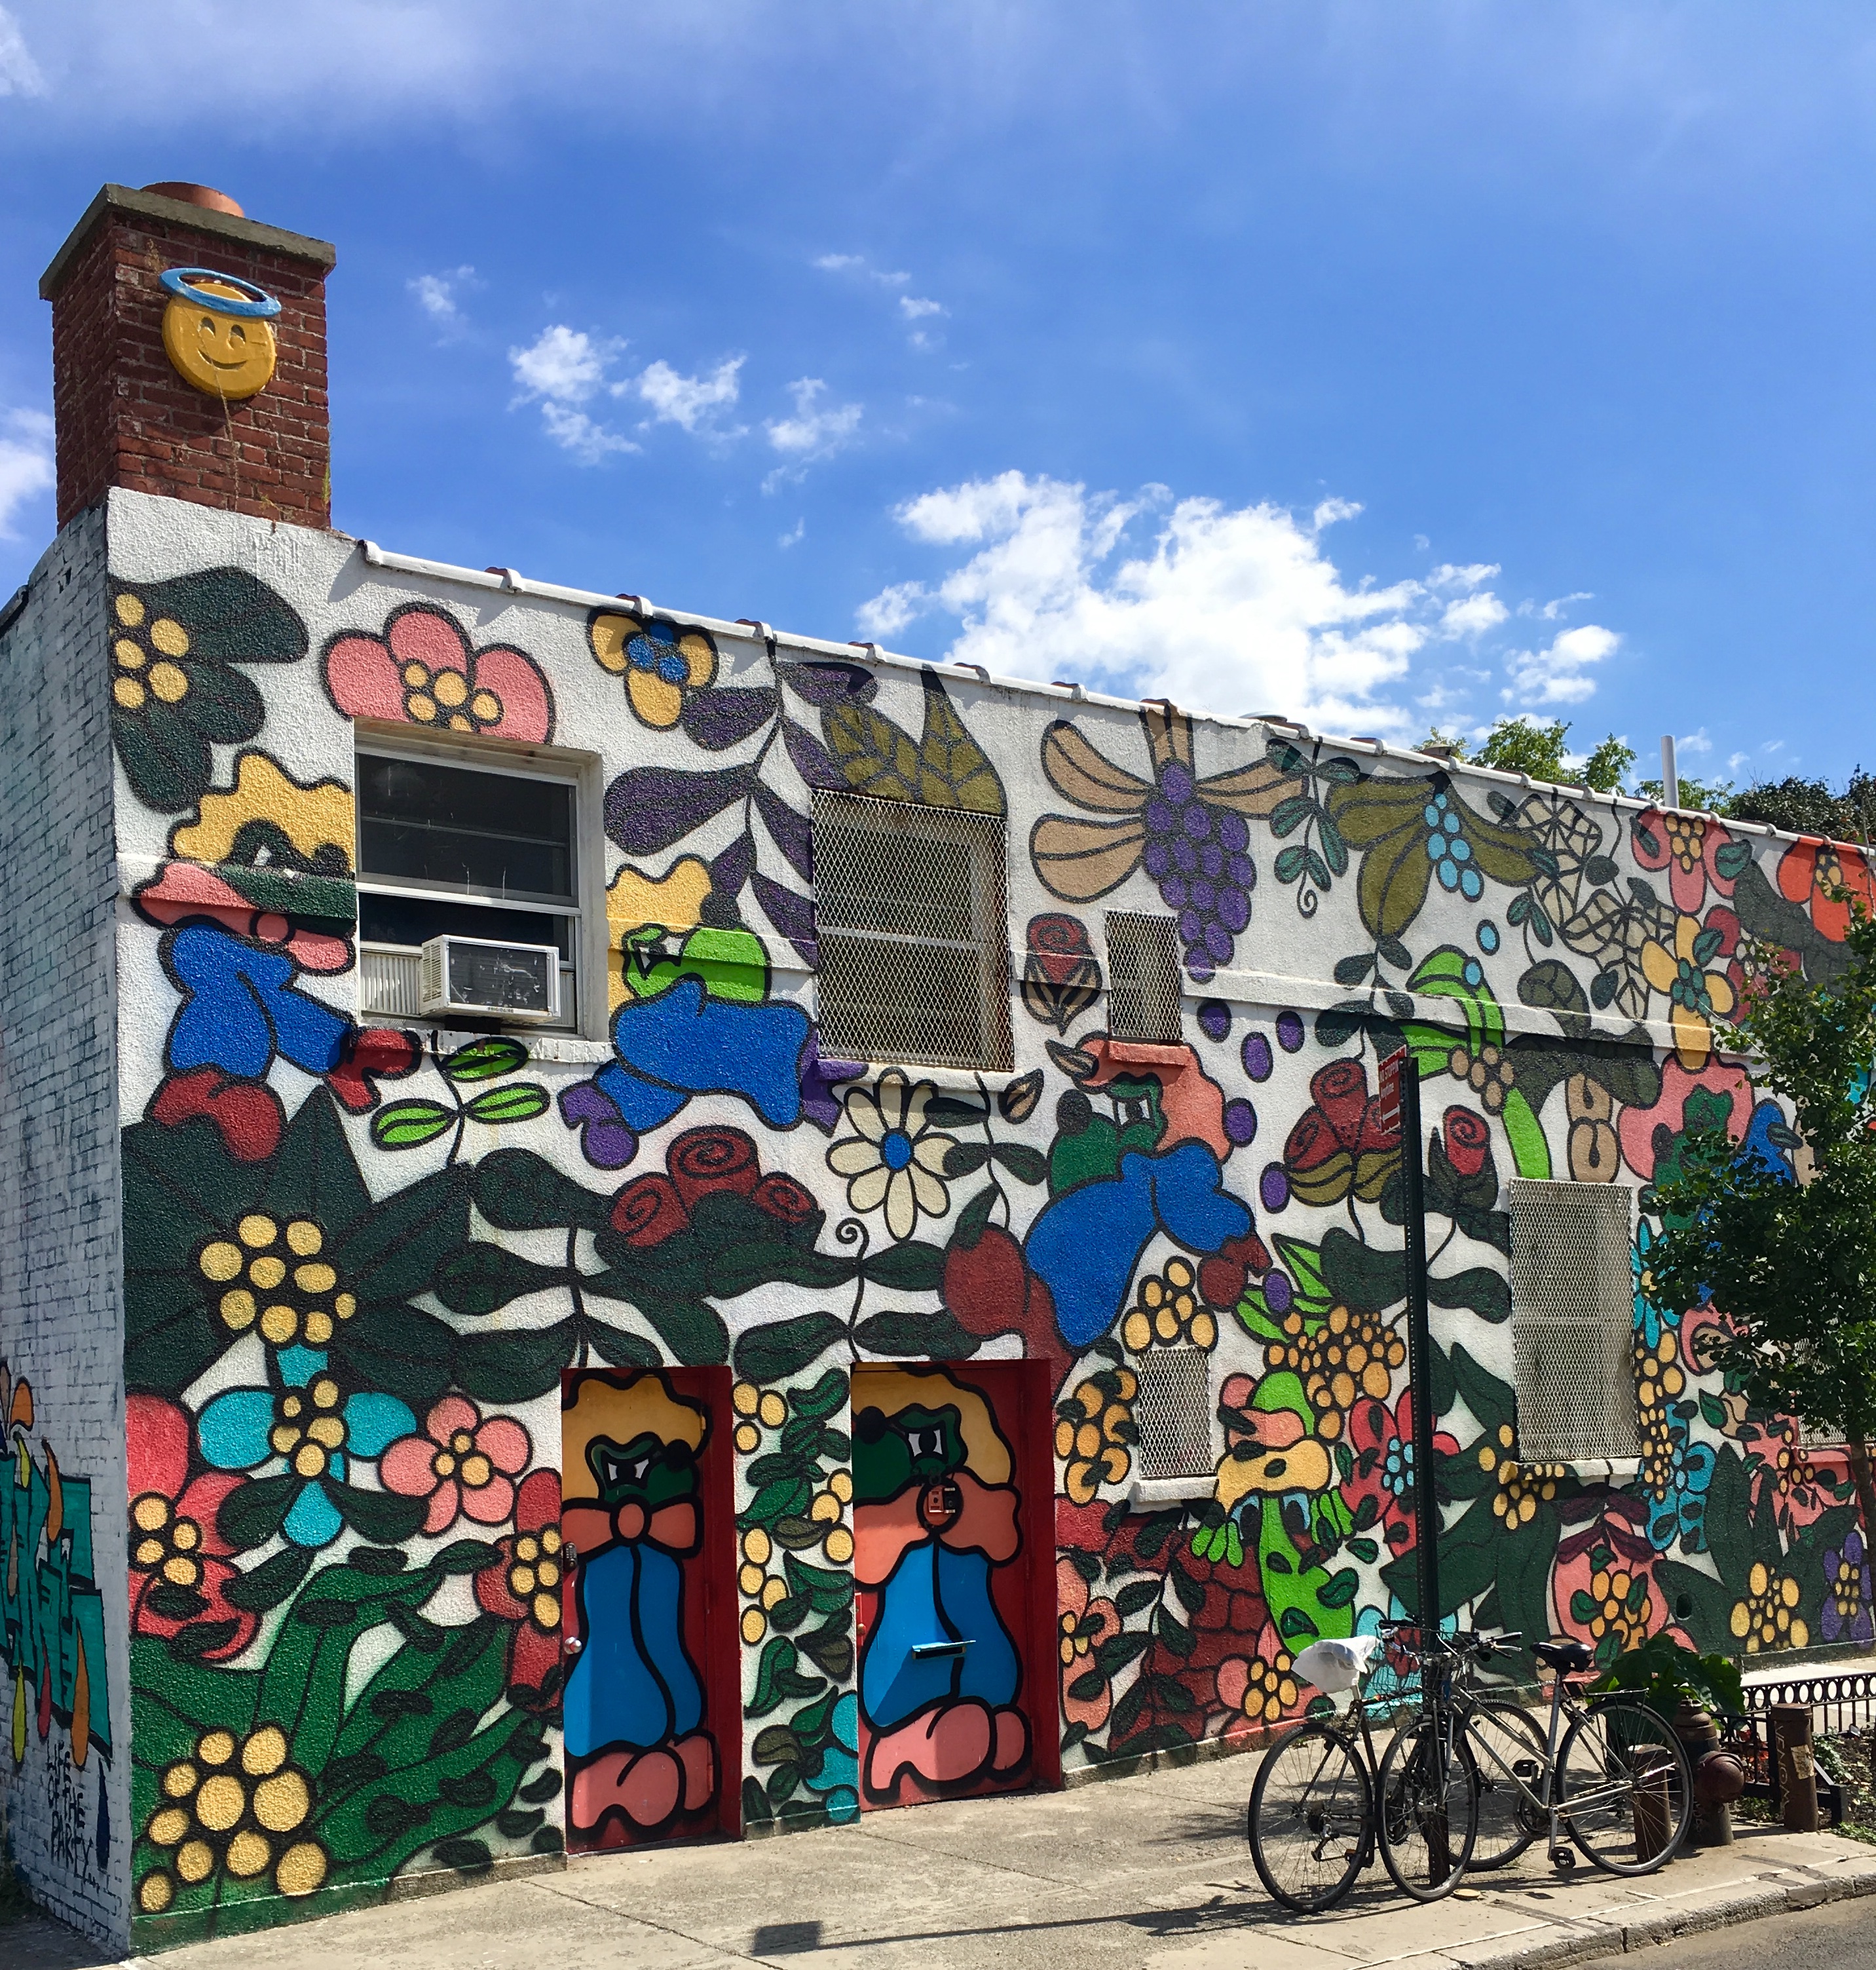 This mural by artist LilKool can be found on the facade of 287 Bond St. Eagle photo by Lore Croghan